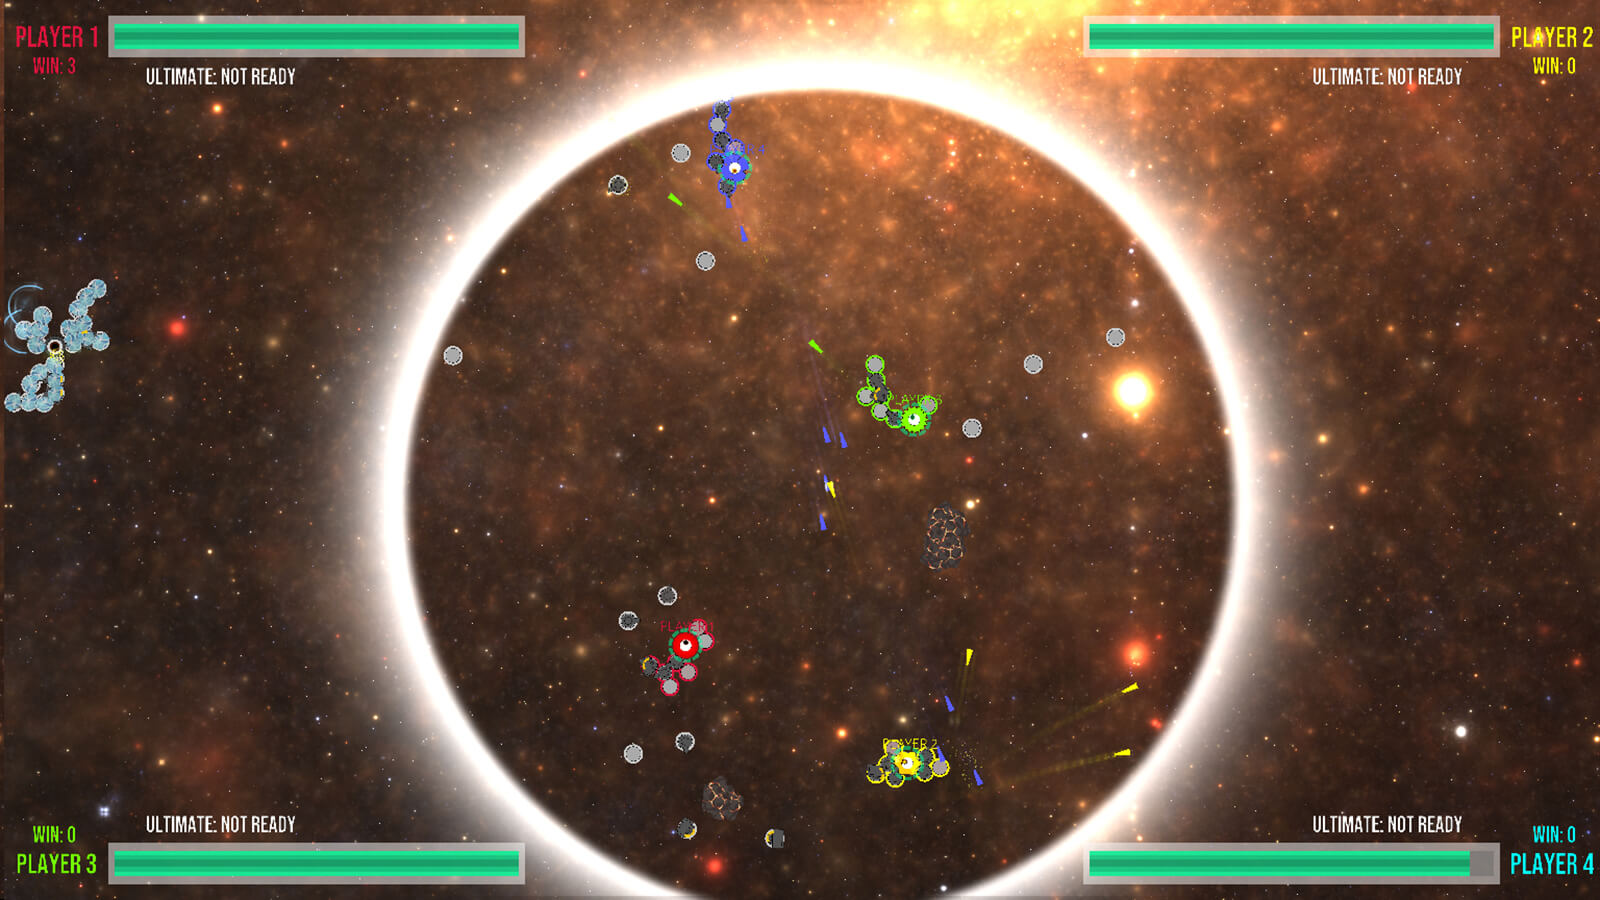 A group of "I" creatures battle each other in space with the giant defense and weapon attachments they've accumulated.